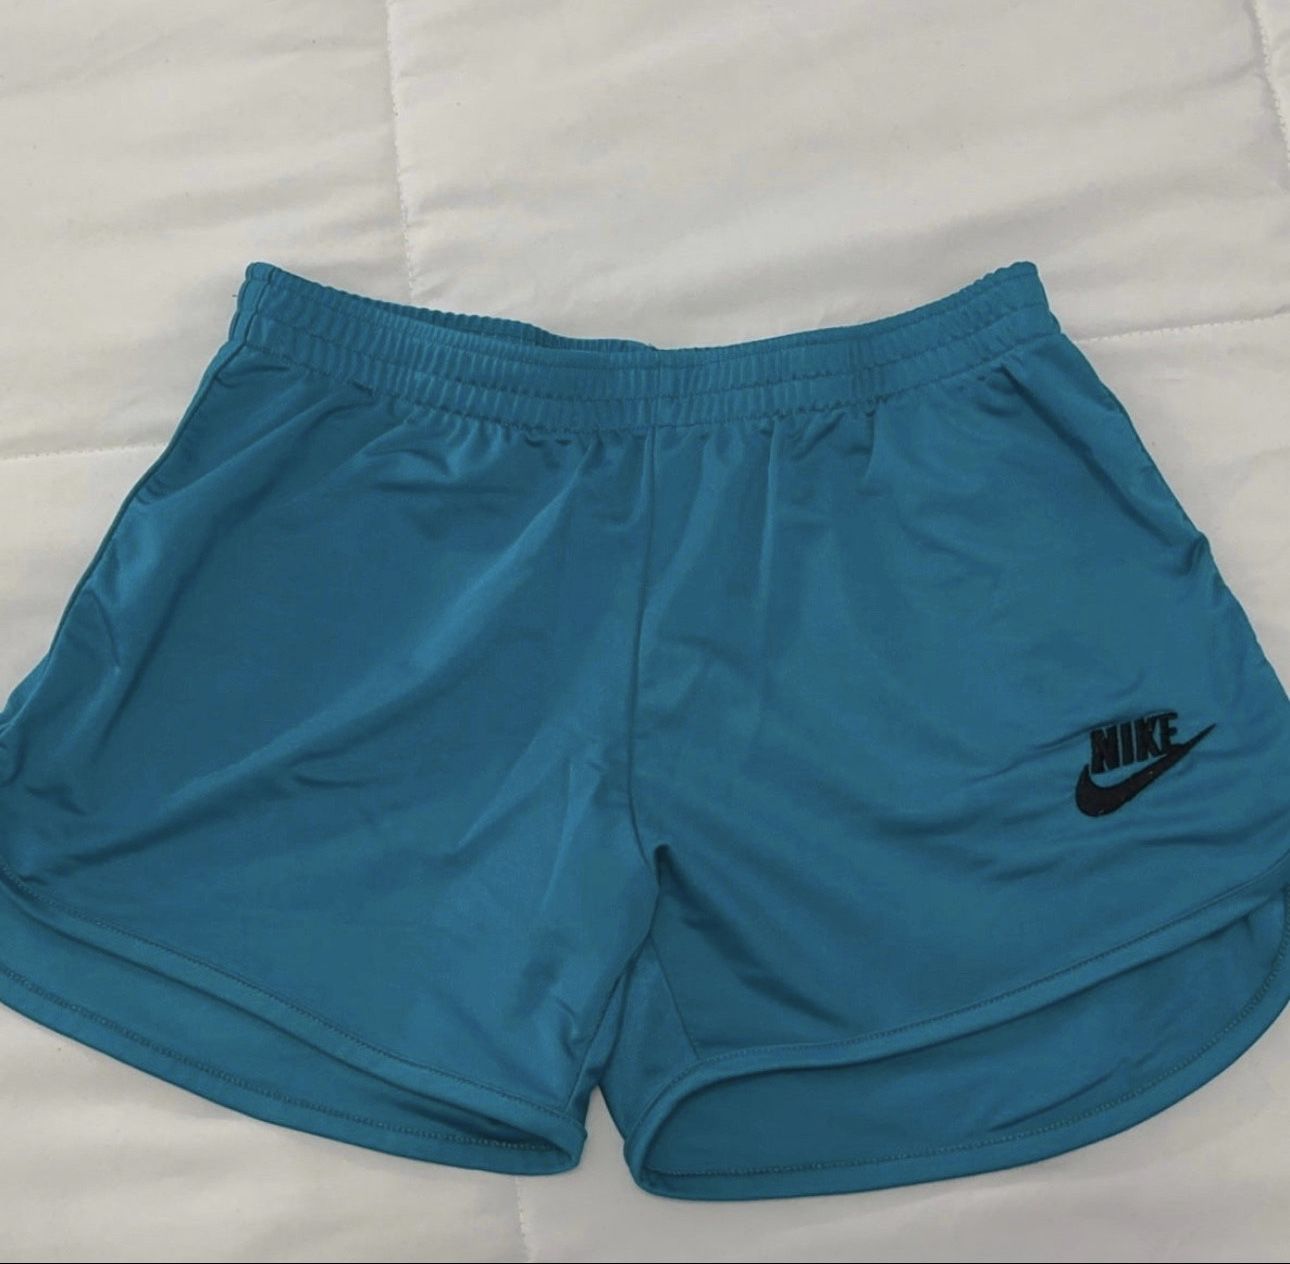 VINTAGE NIKE SHORTS TEAL EMBROIDERED LOGO XS